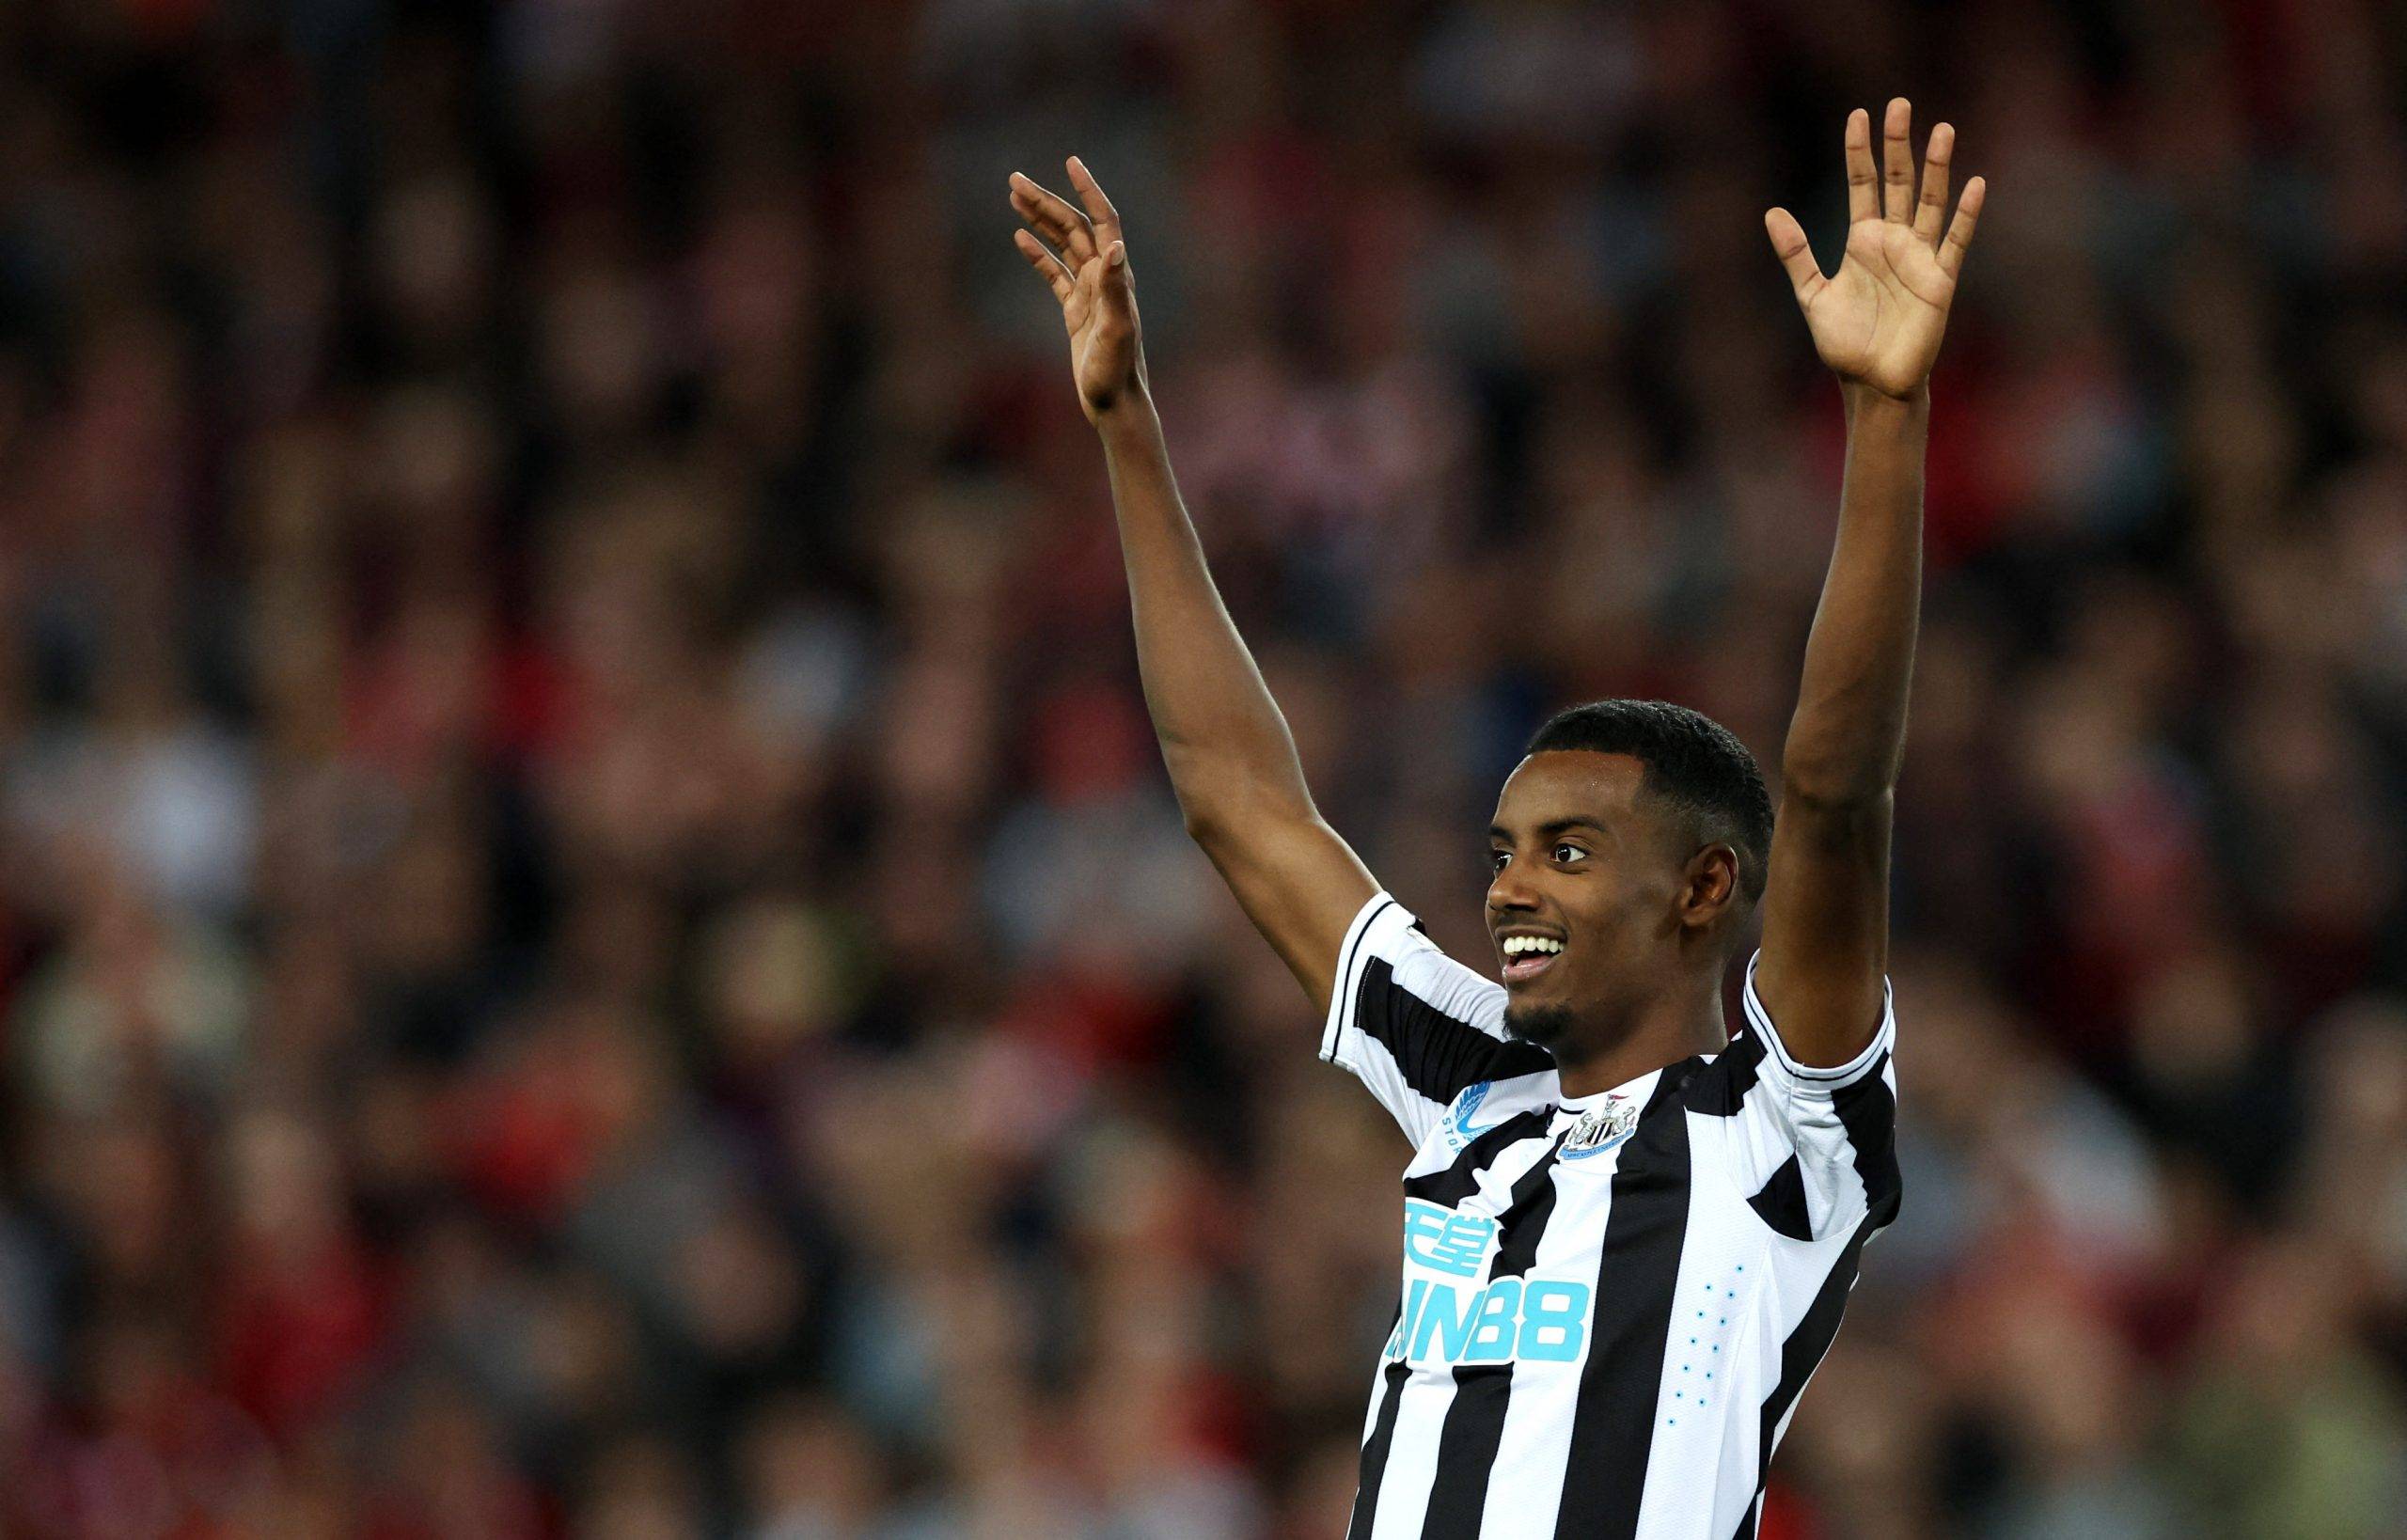 Newcastle ace Alexander Isak proved Chris Waugh wrong in latest victory - Newcastle United News